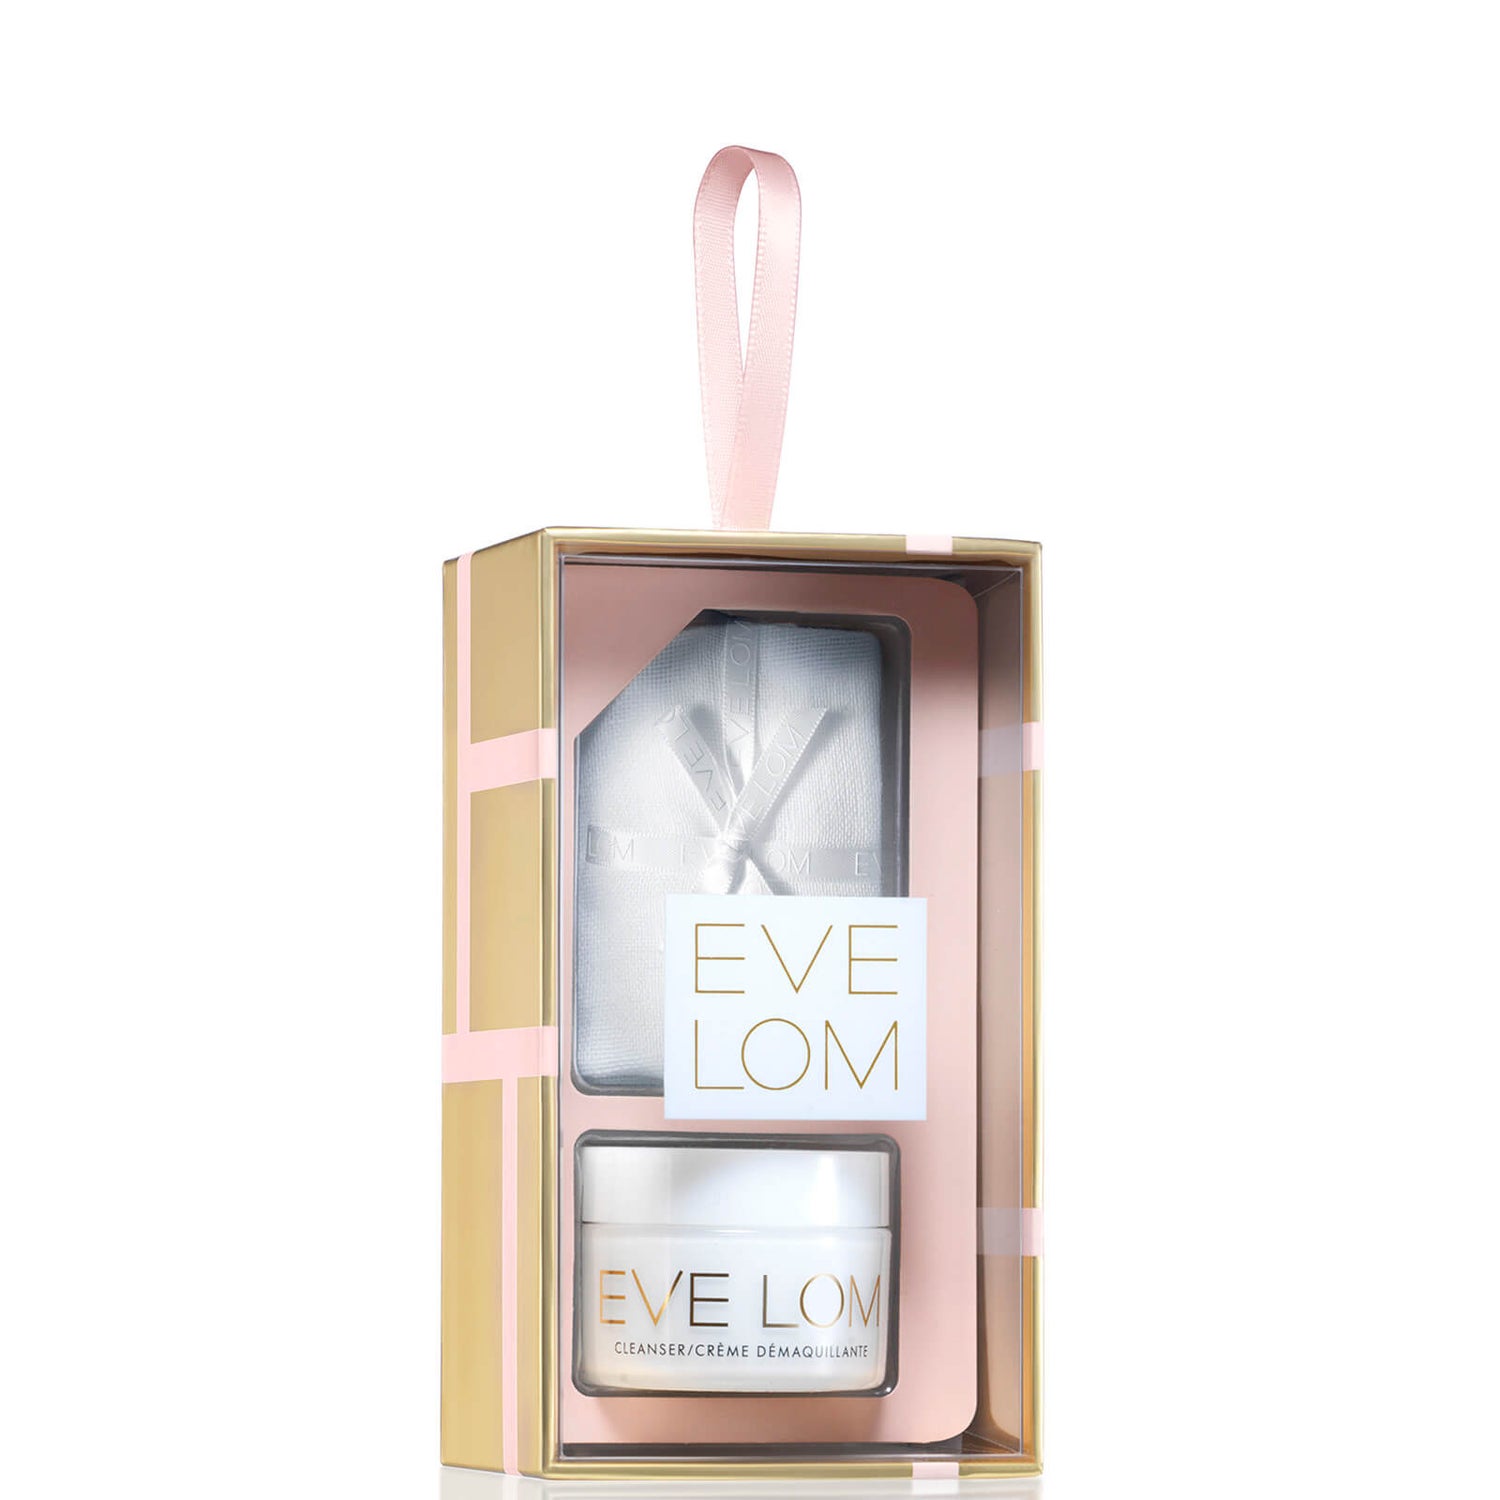 Eve Lom Iconic Cleanse Ornament (Worth $24.00)